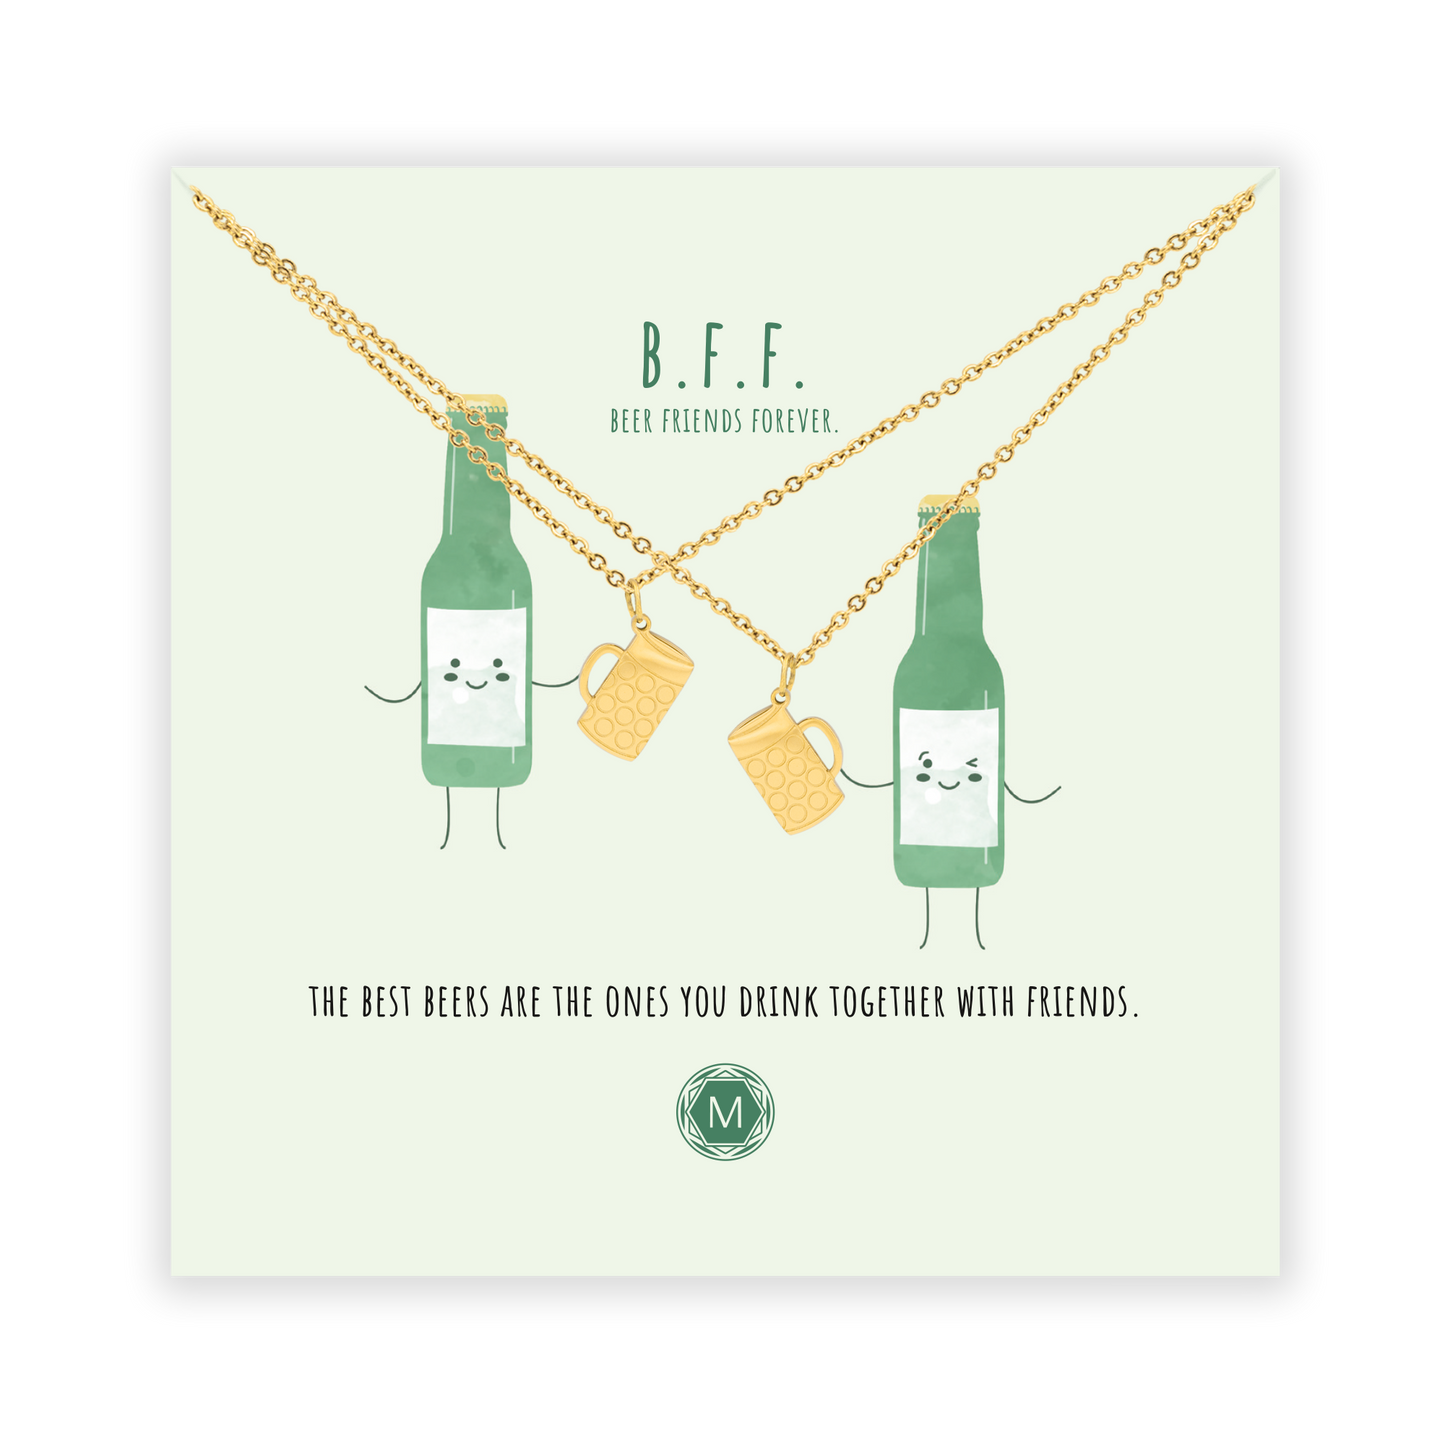 B.F.F. BEER FRIENDS FOREVER 2x Necklace